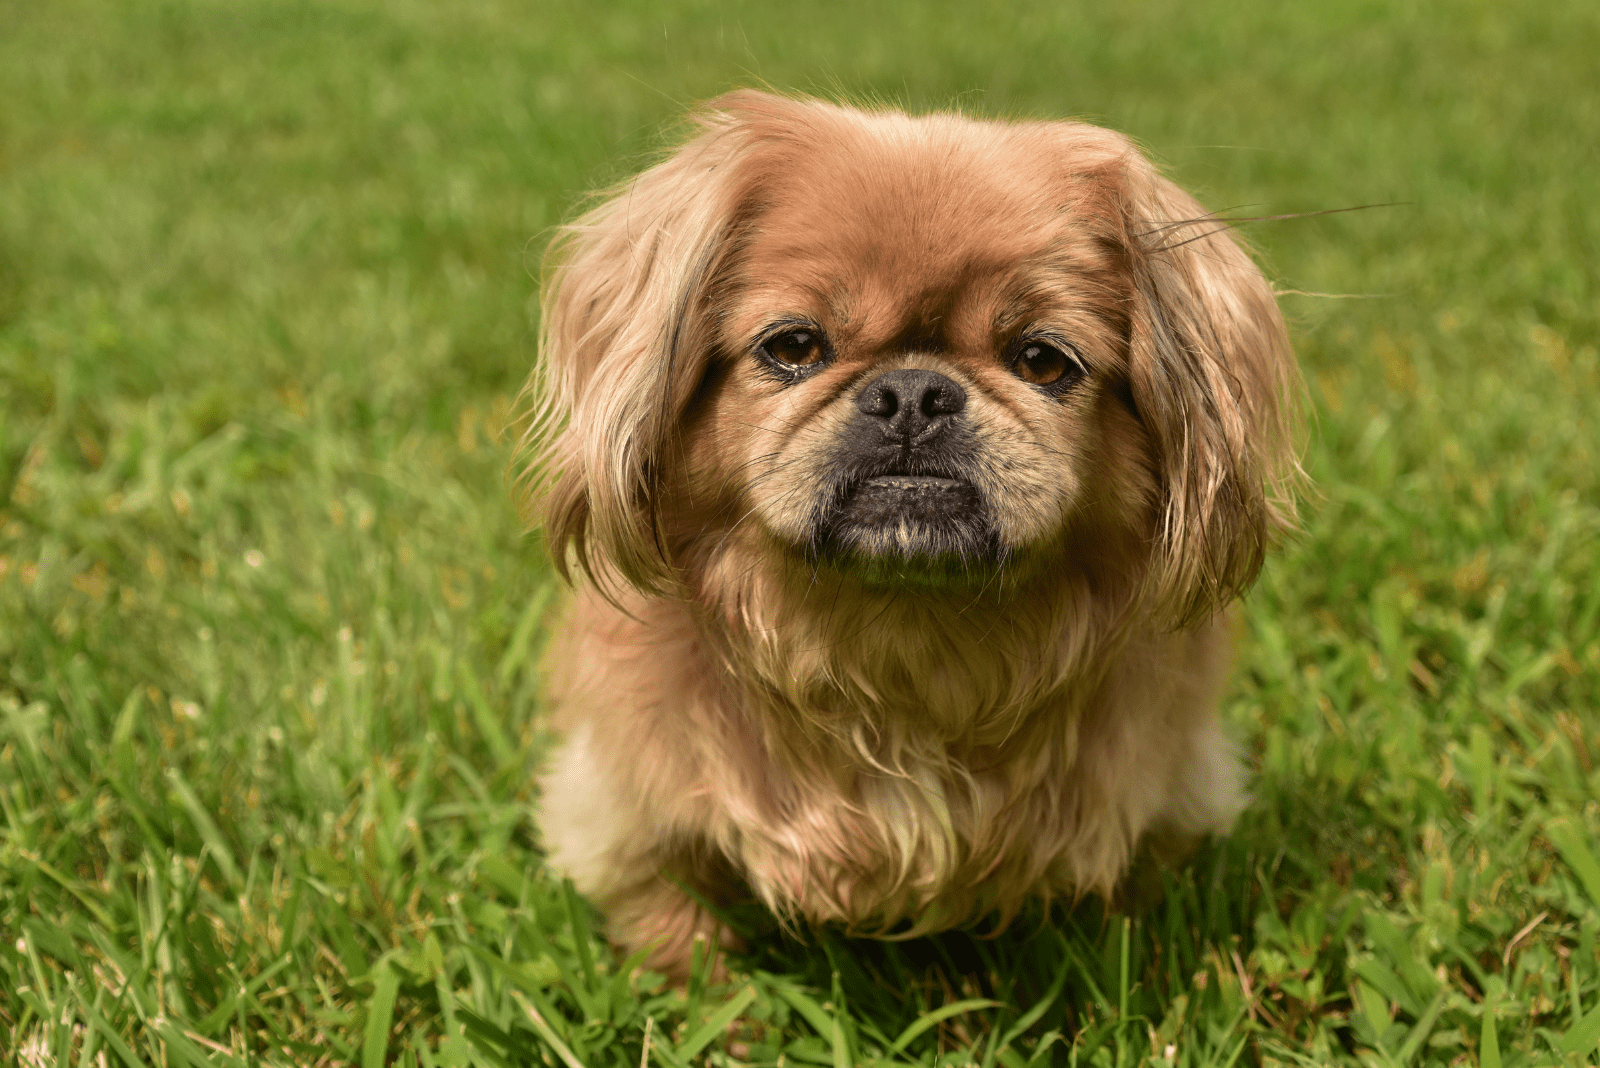 Pekingese puppy sitting on the grass and looking at the camera